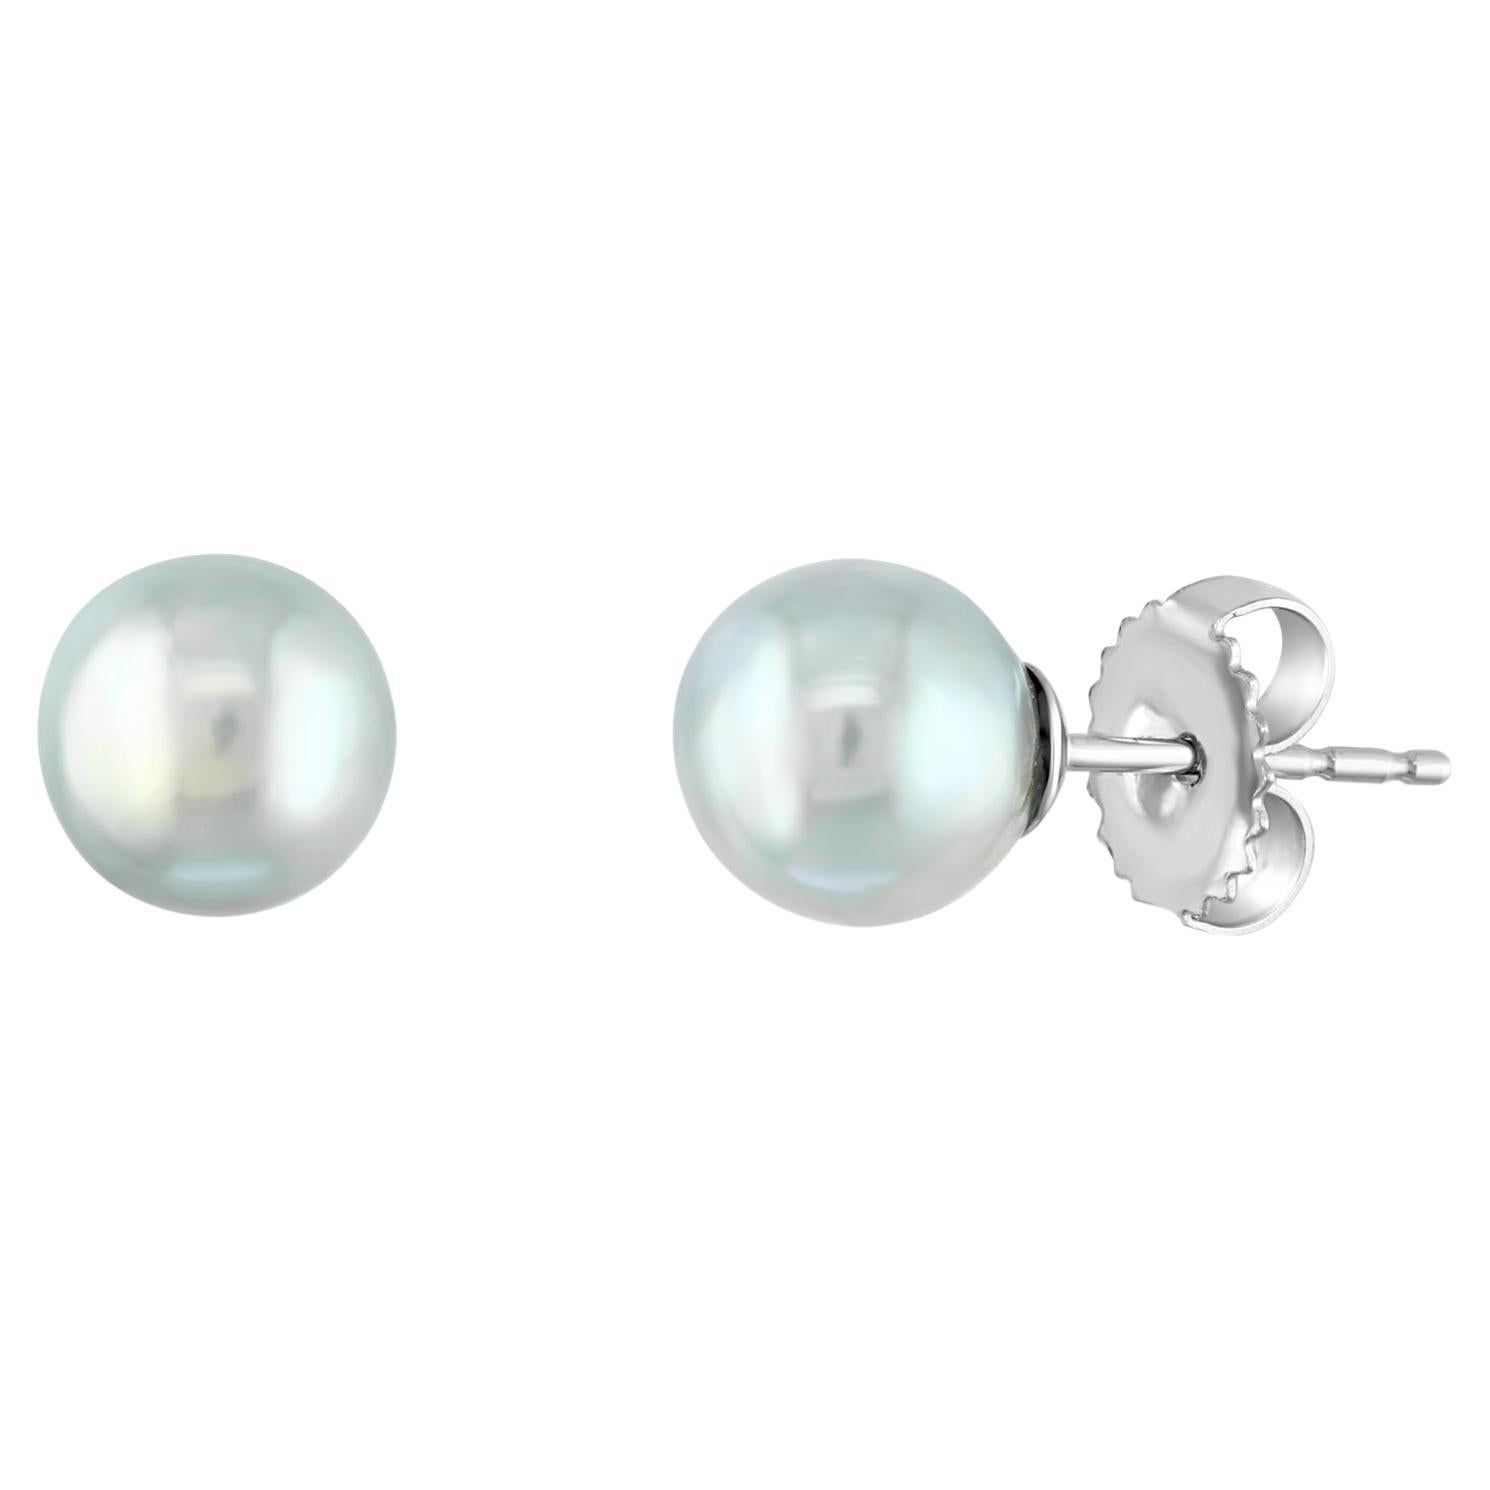 11-12MM Natural baroque white pearl earrings 925 silver gift Fashion Wedding 